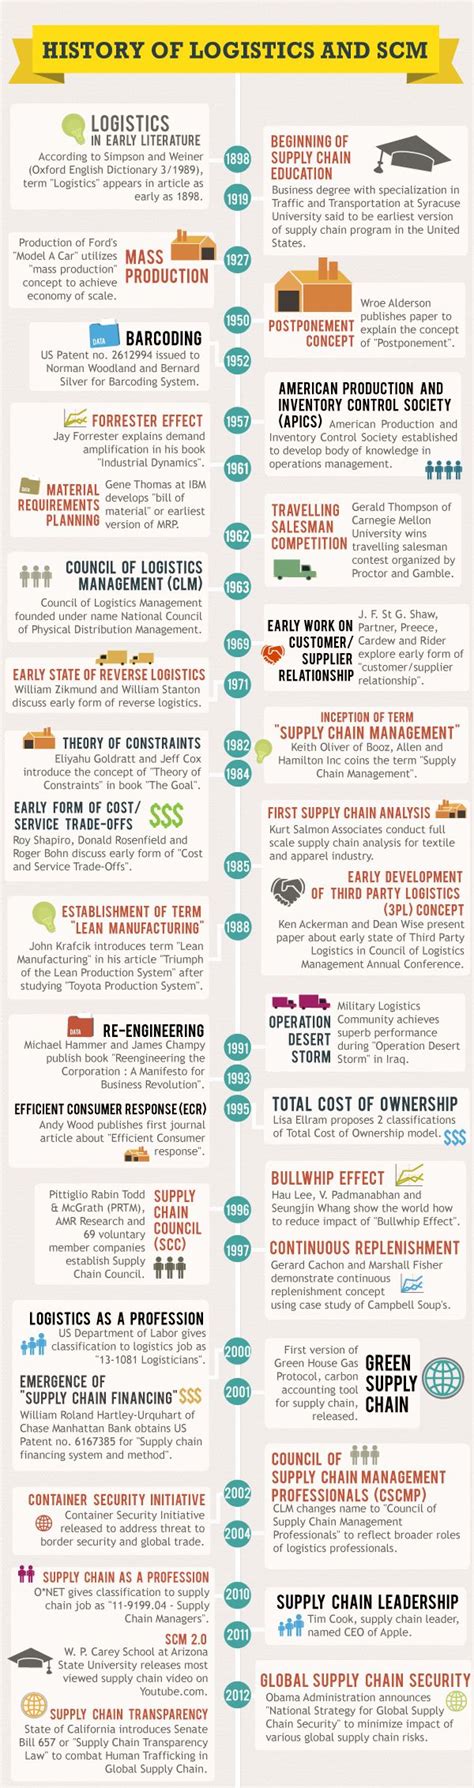 Infographic Time The Evolution Of Logistics And Supply Chain